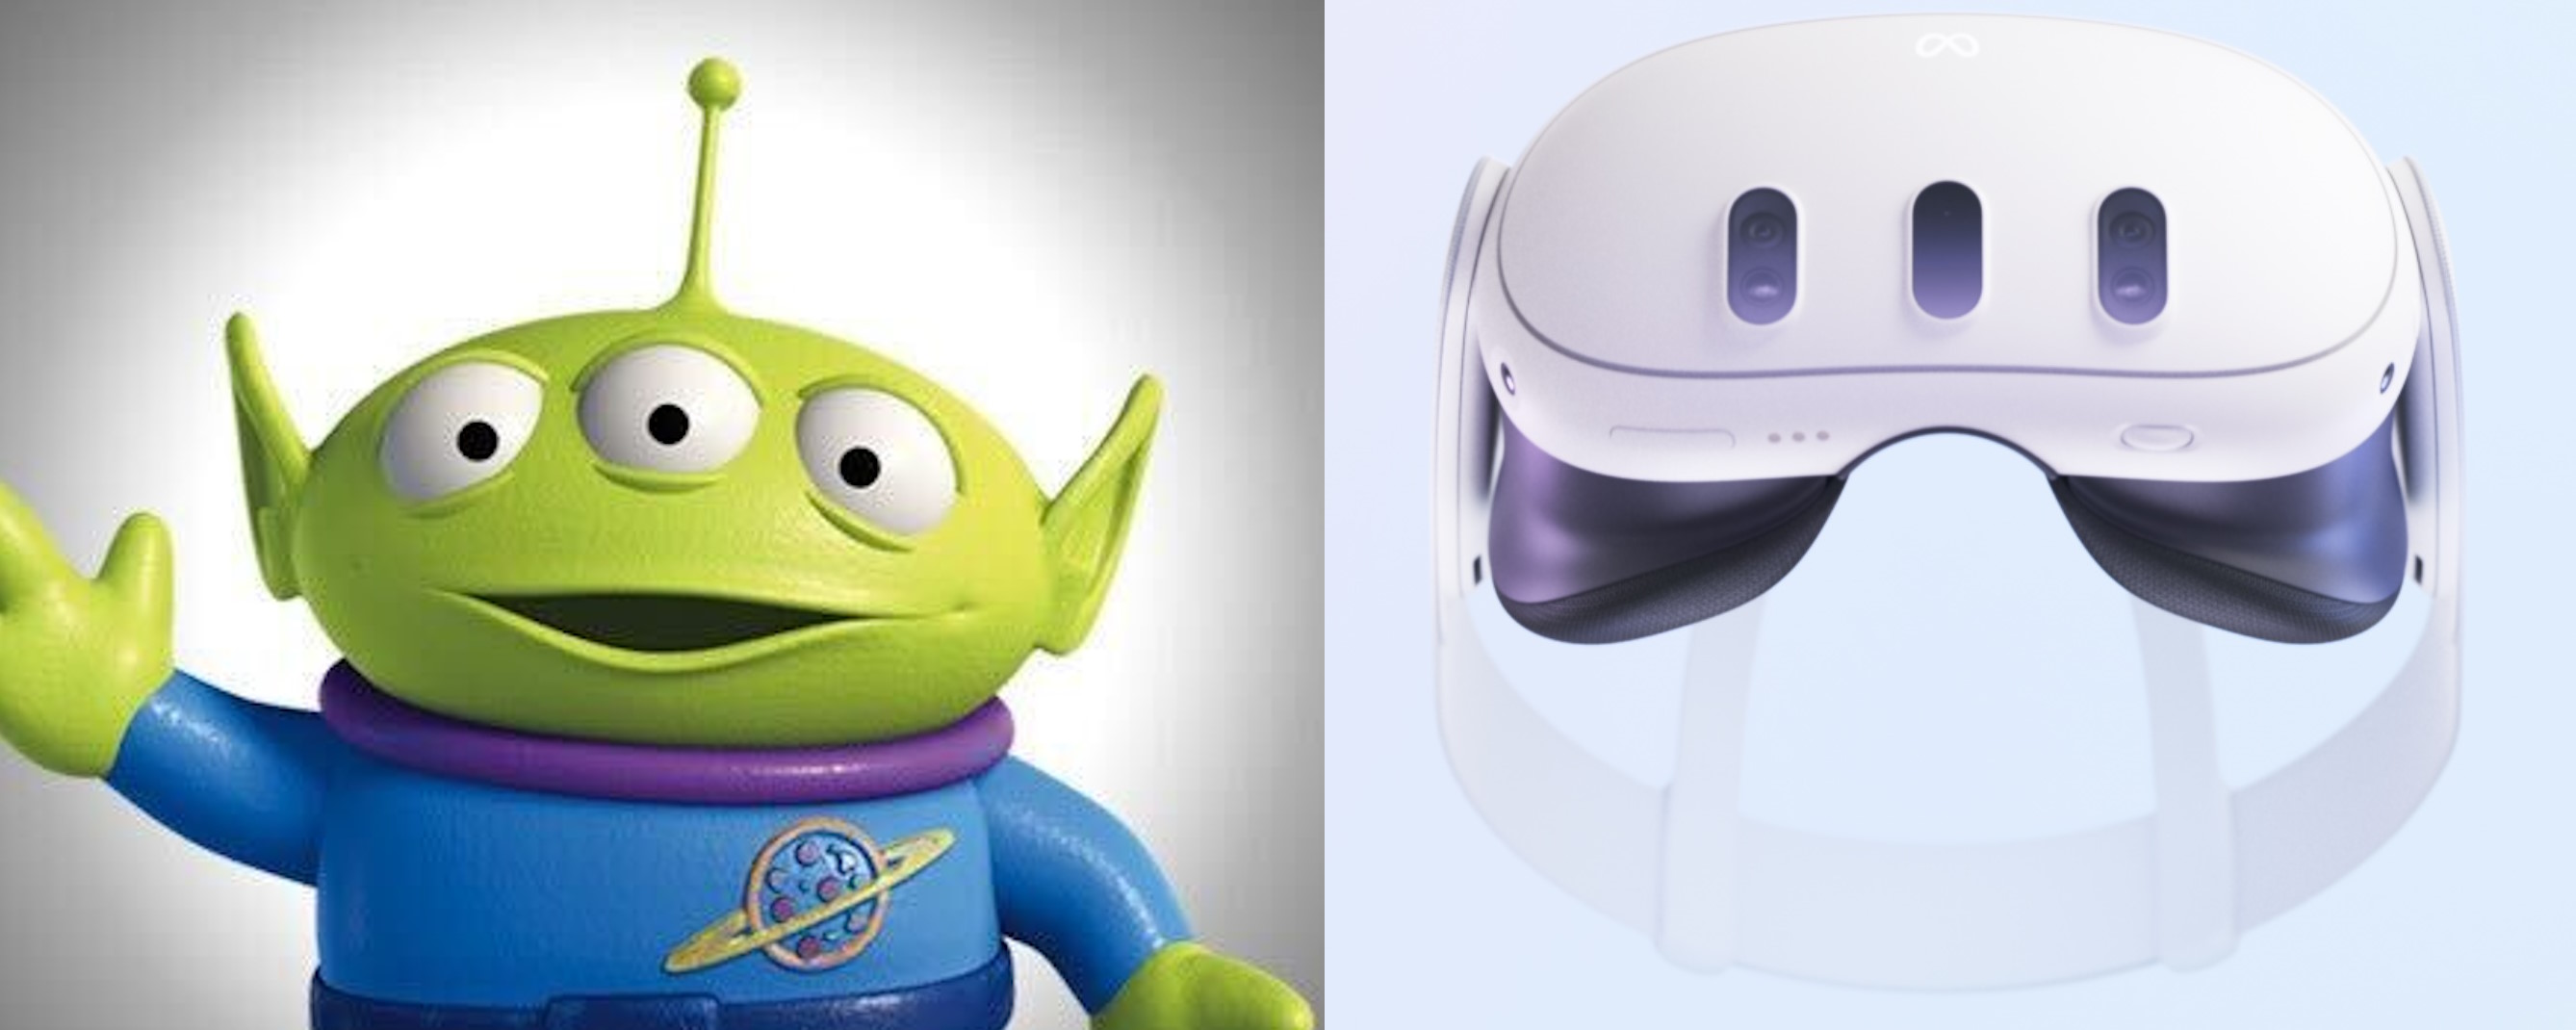 The Meta Quest 3 headset reminds us of the Toy Story alien